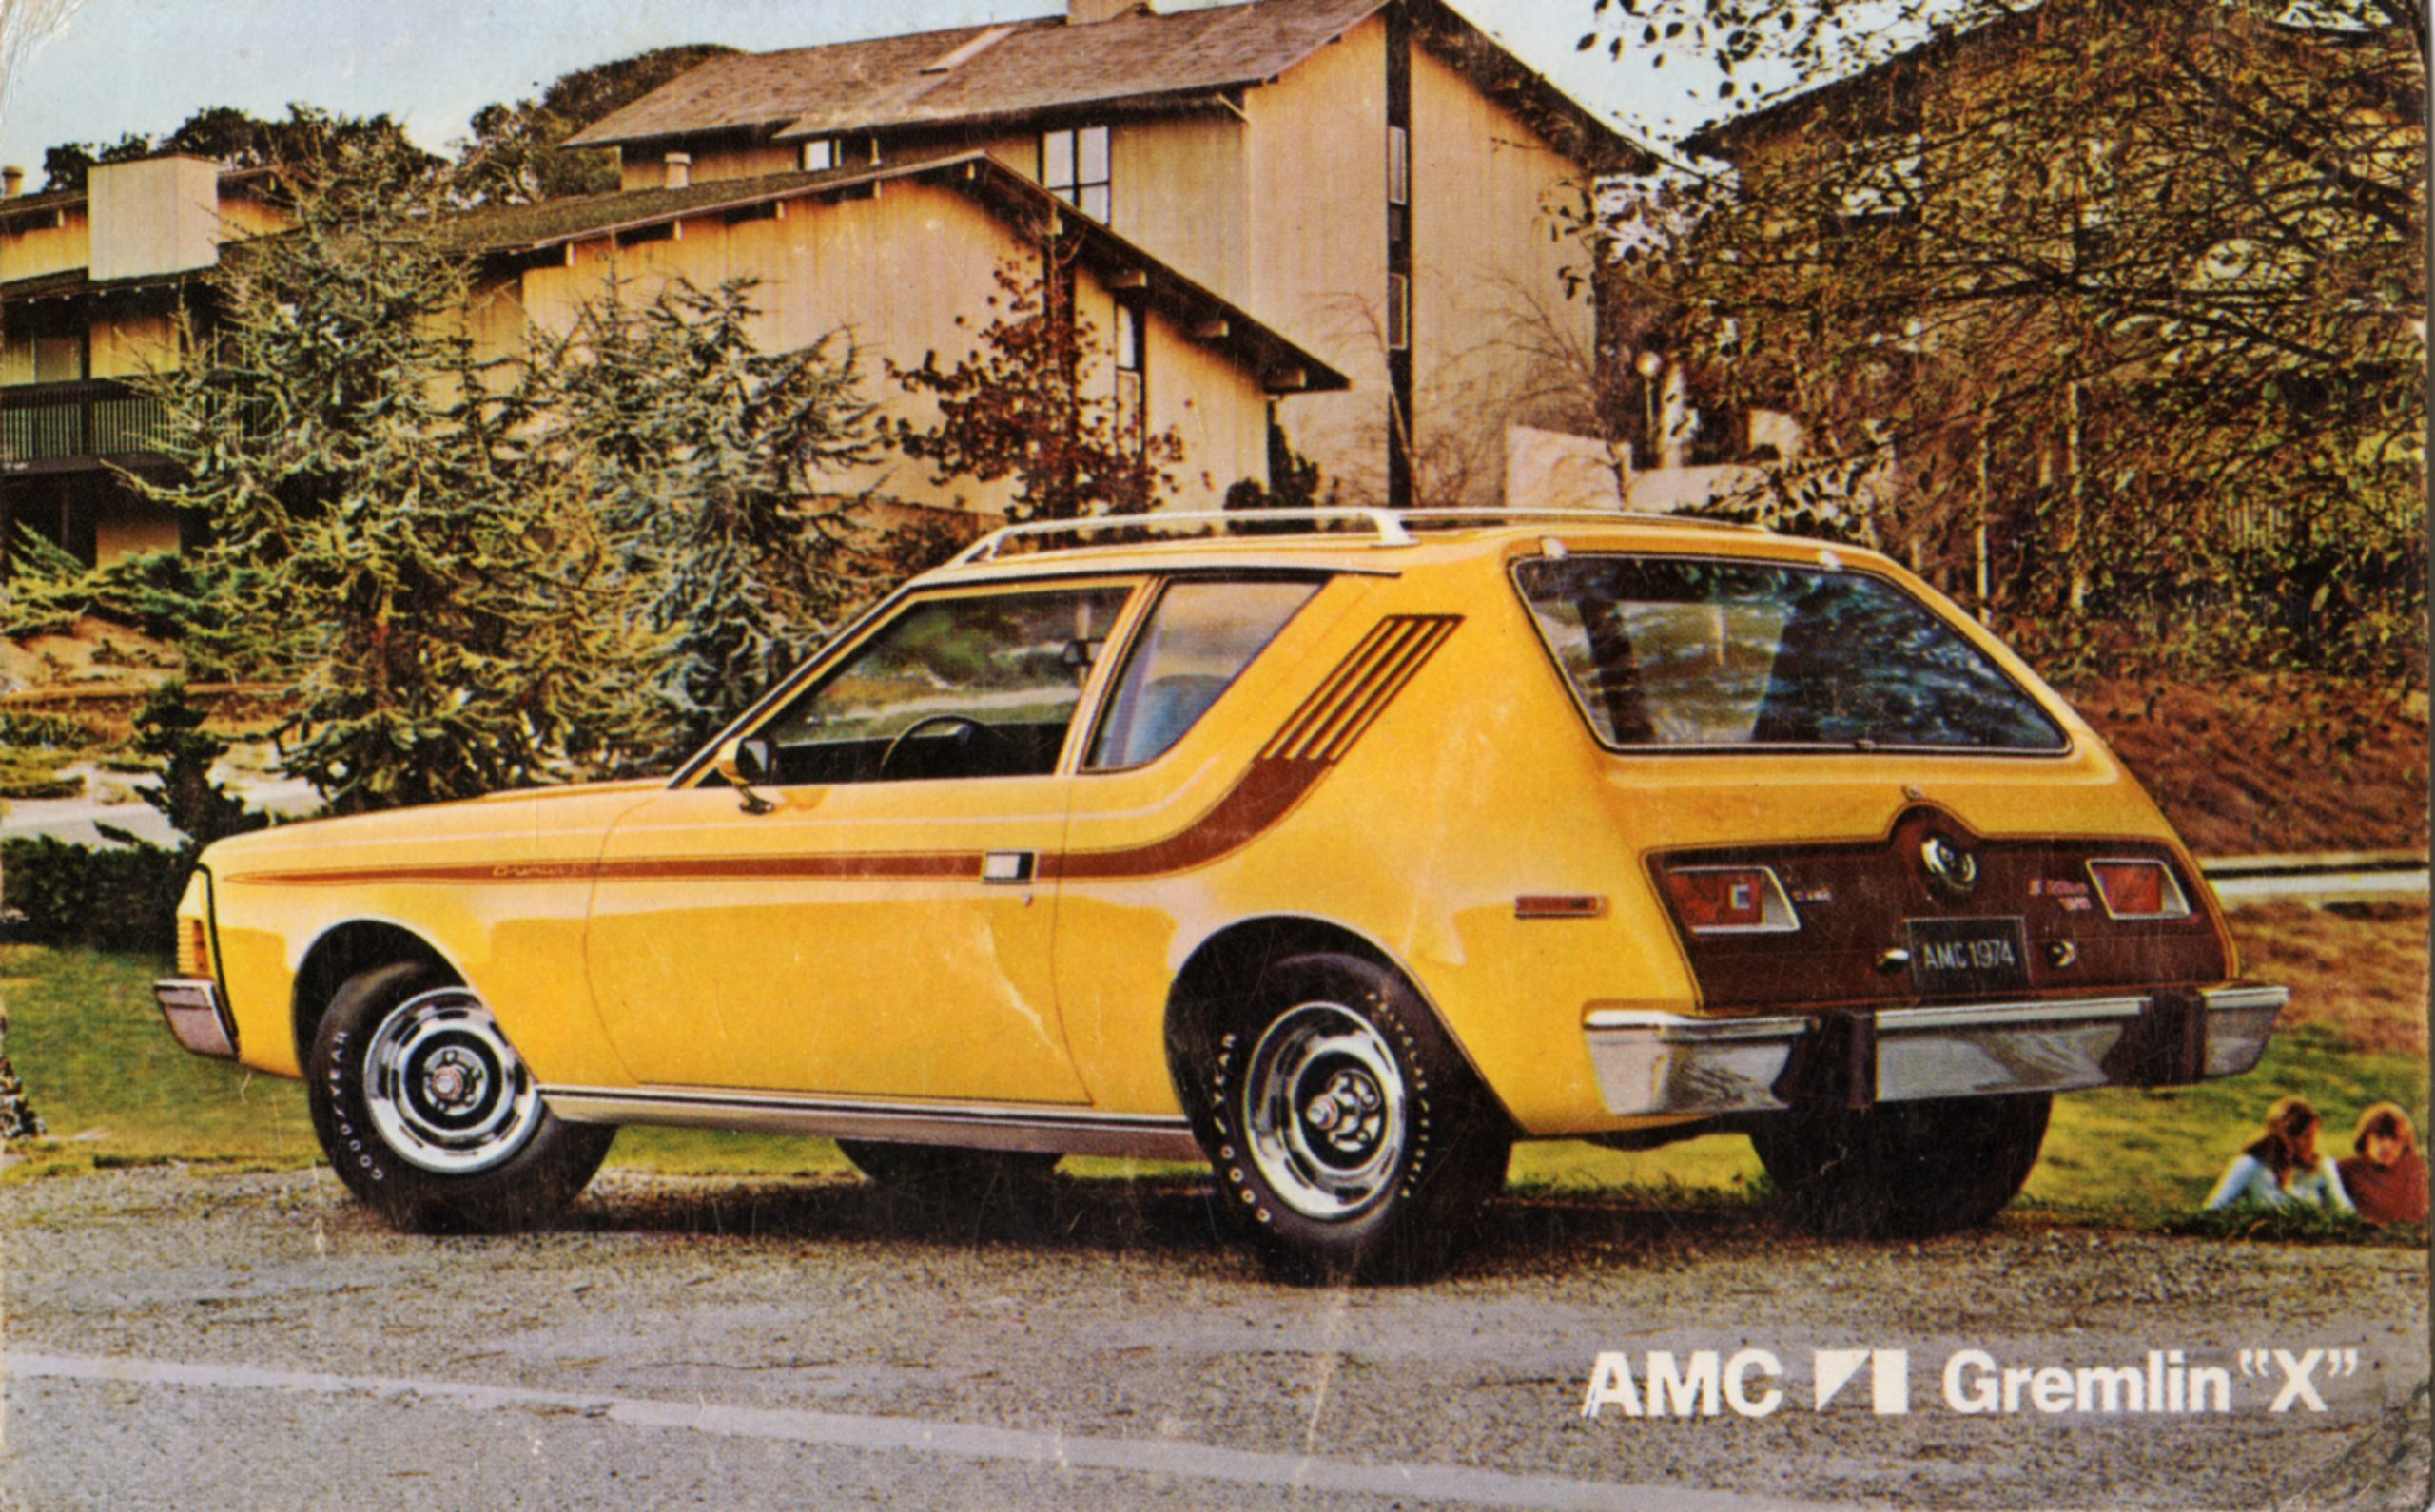 A yellow AMC Gremlin is parked in a 70s suburban neighborhood and ranks in many most hated cars lists